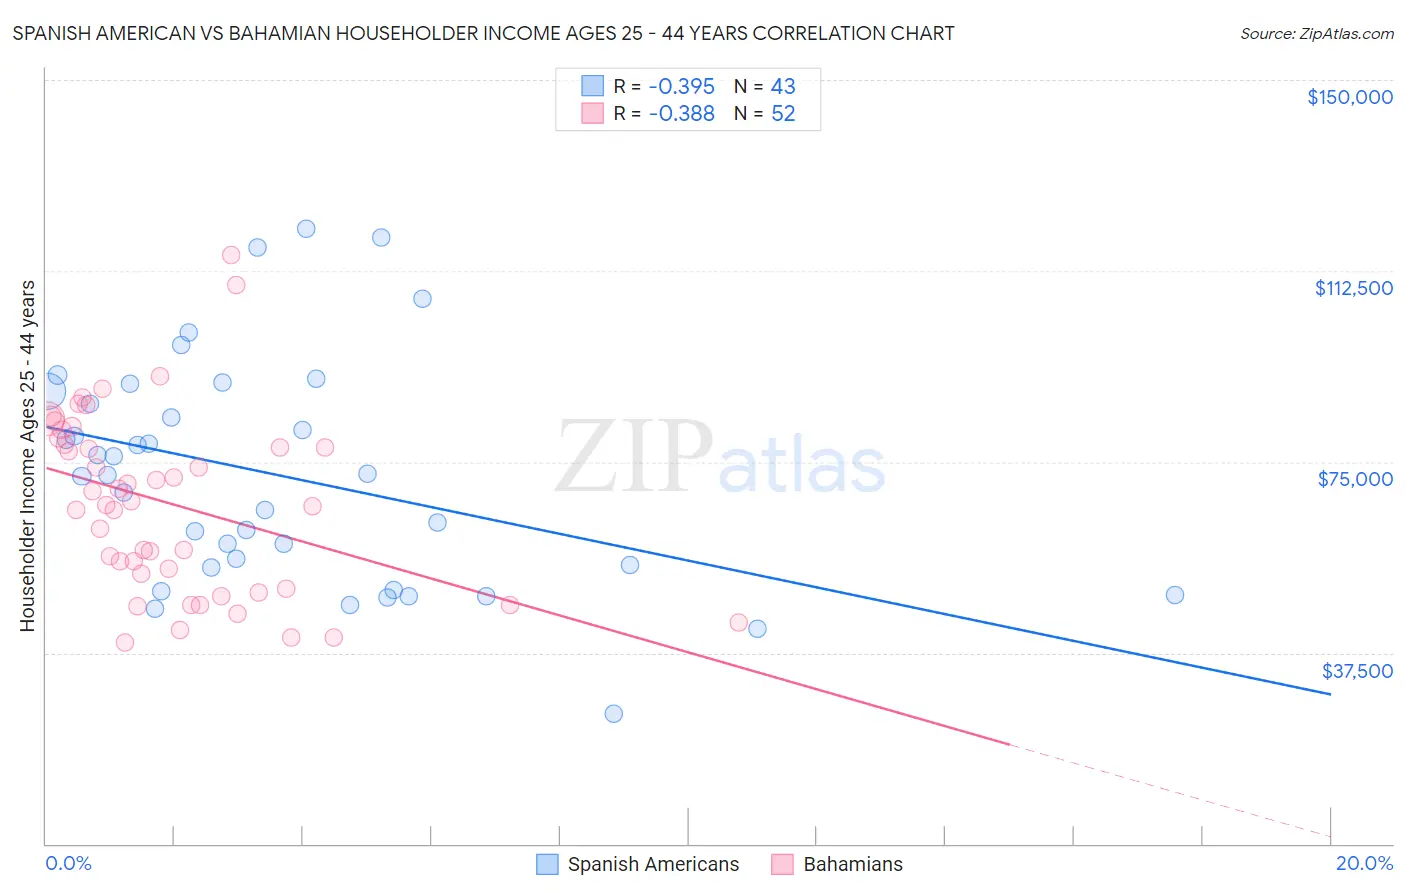 Spanish American vs Bahamian Householder Income Ages 25 - 44 years